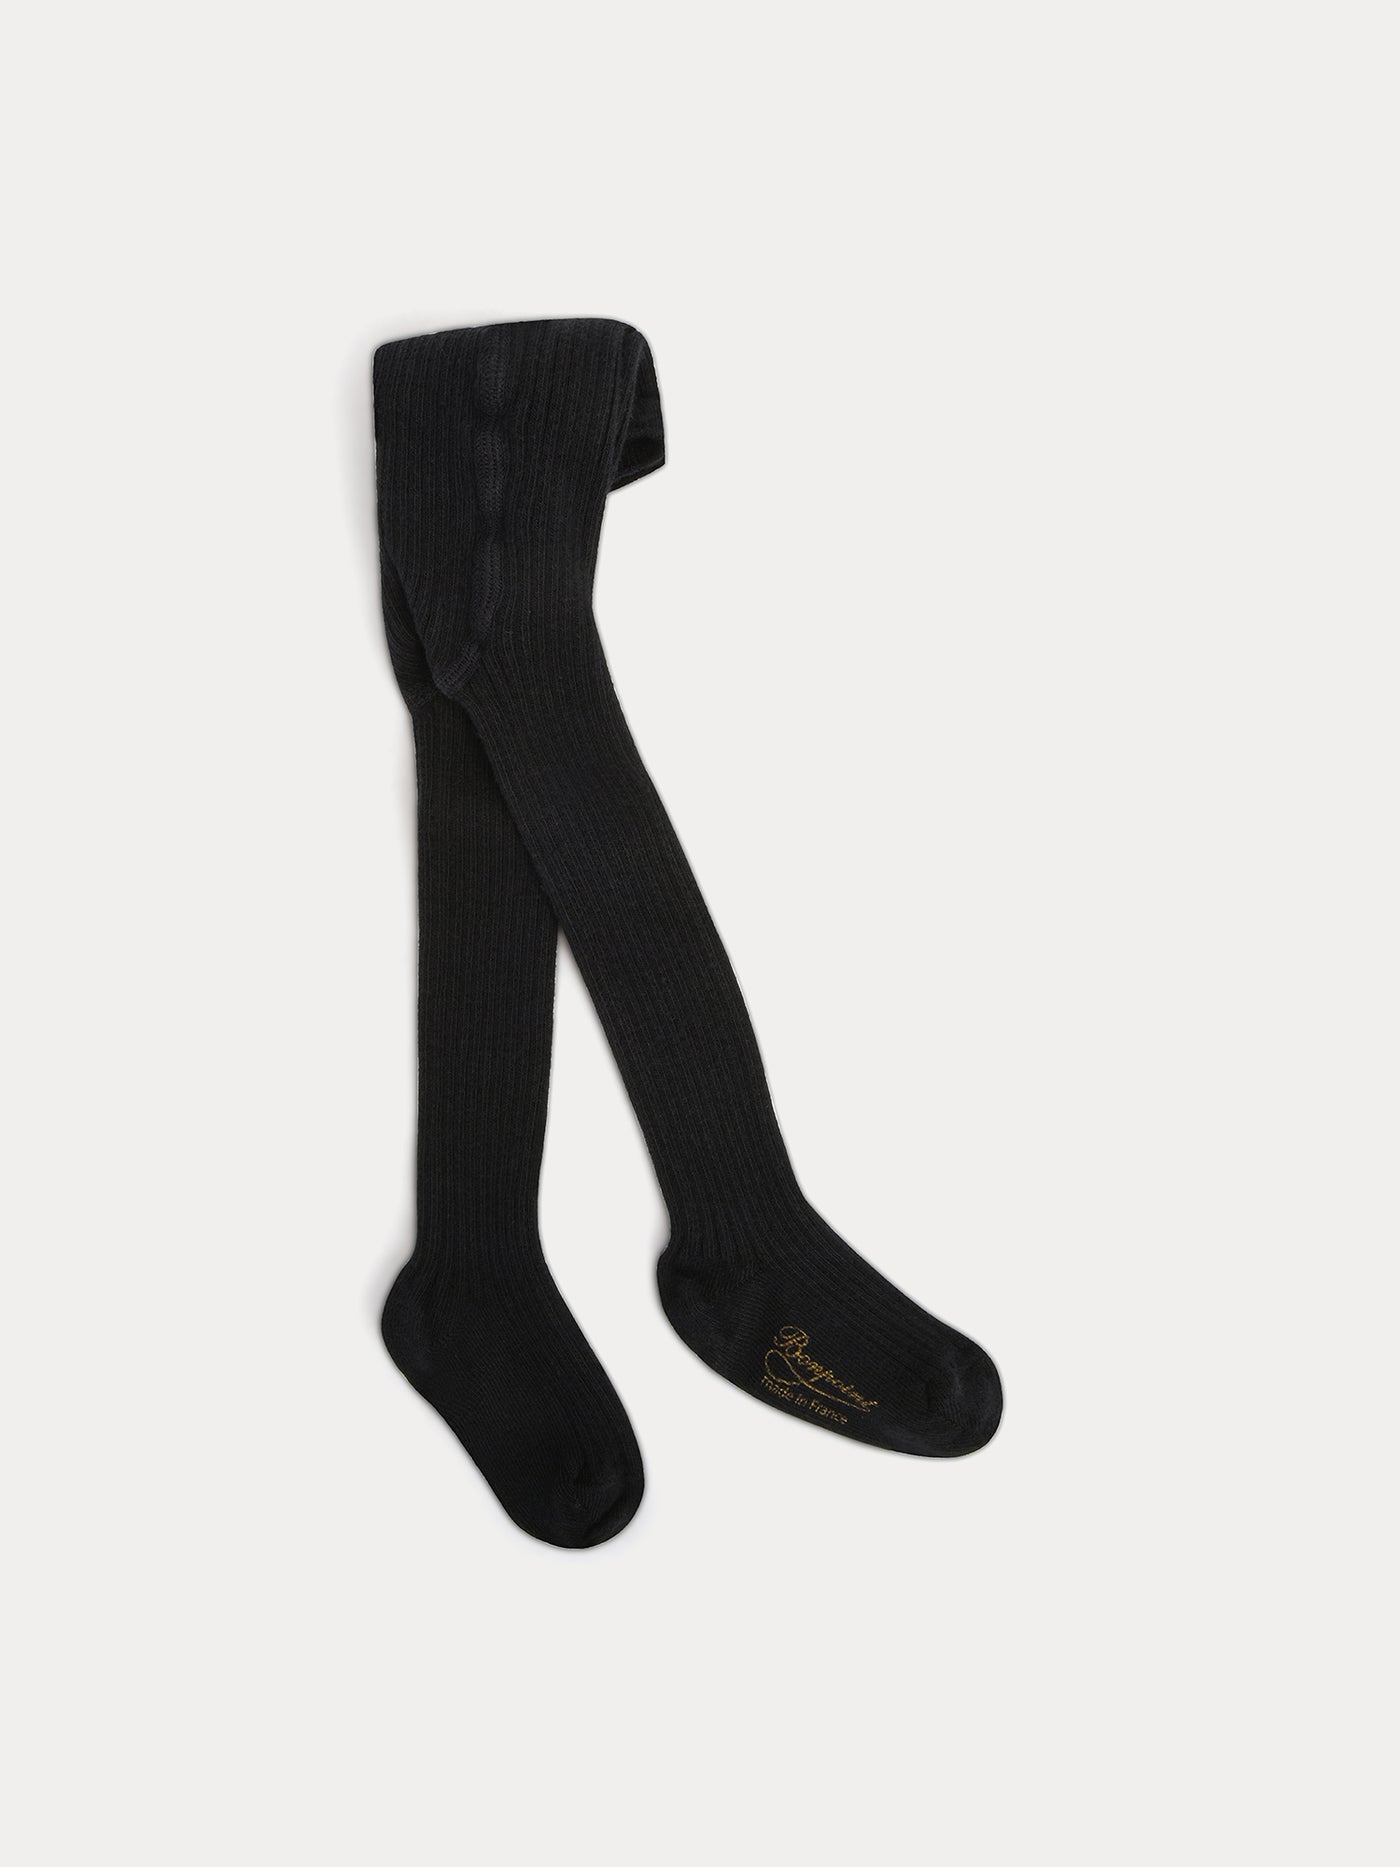 Girls, Black - Socks & Tights Online  Buy Baby & Kids Products at